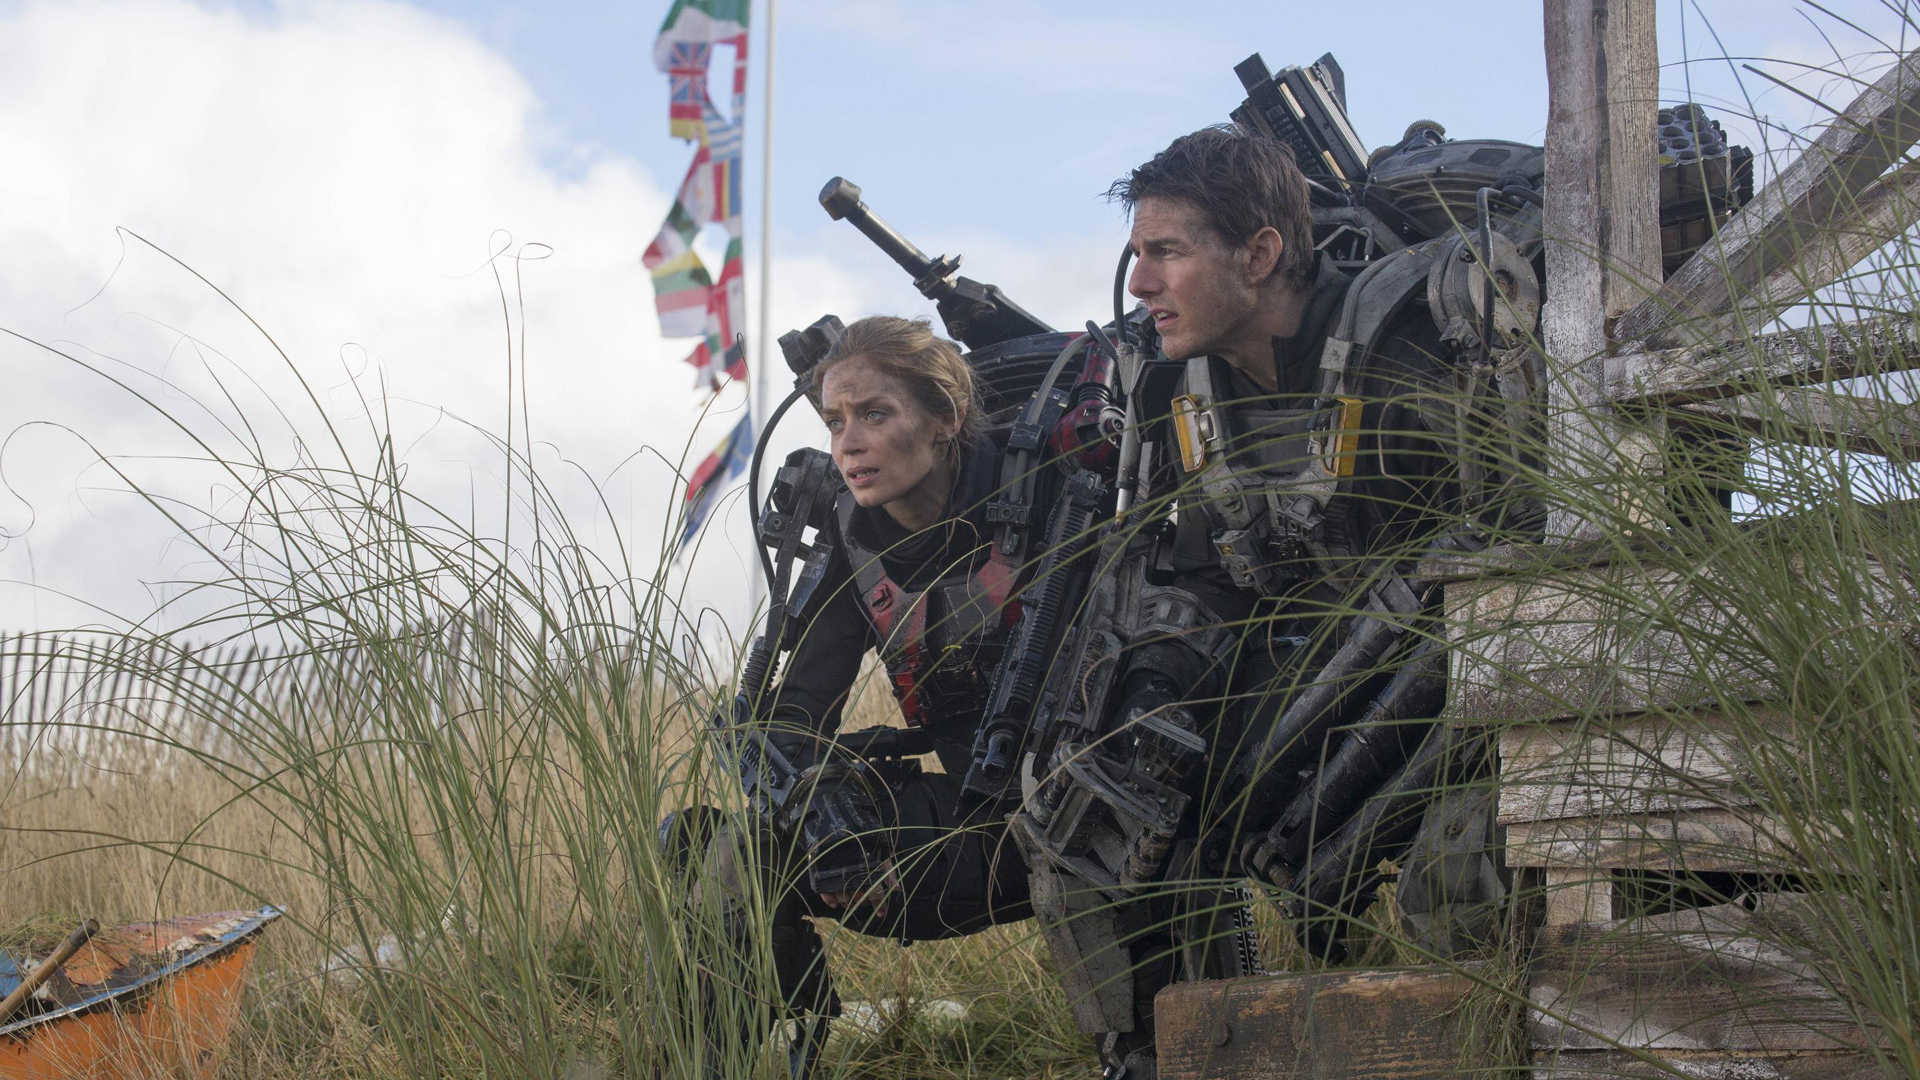 Edge of Tomorrow - Tom Cruise and Emily Blunt